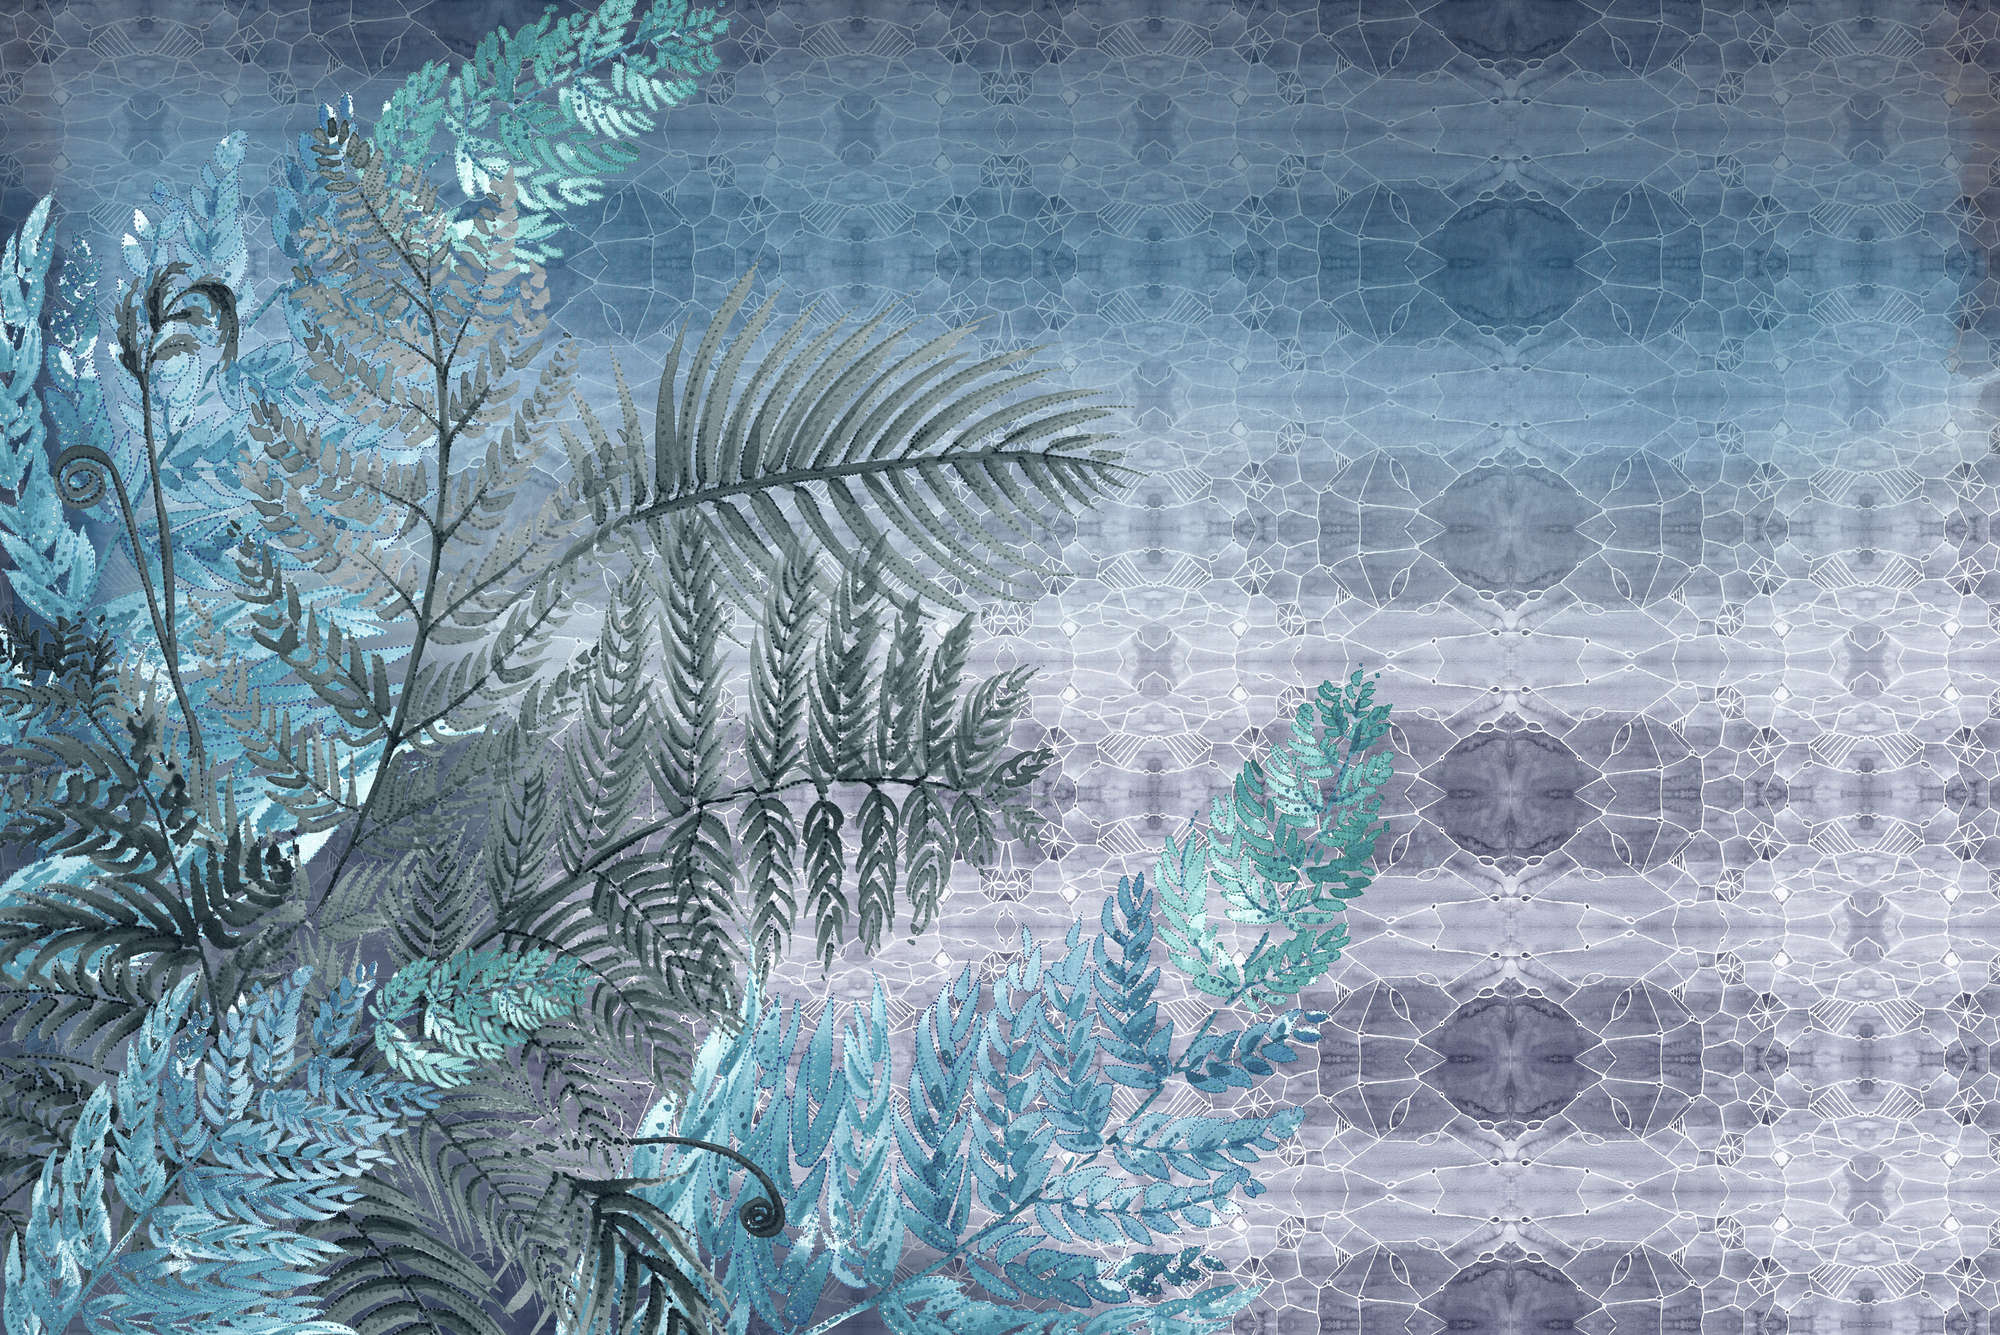             Watercolour photo wallpaper fern pattern in blue and purple on mother of pearl smooth nonwoven
        